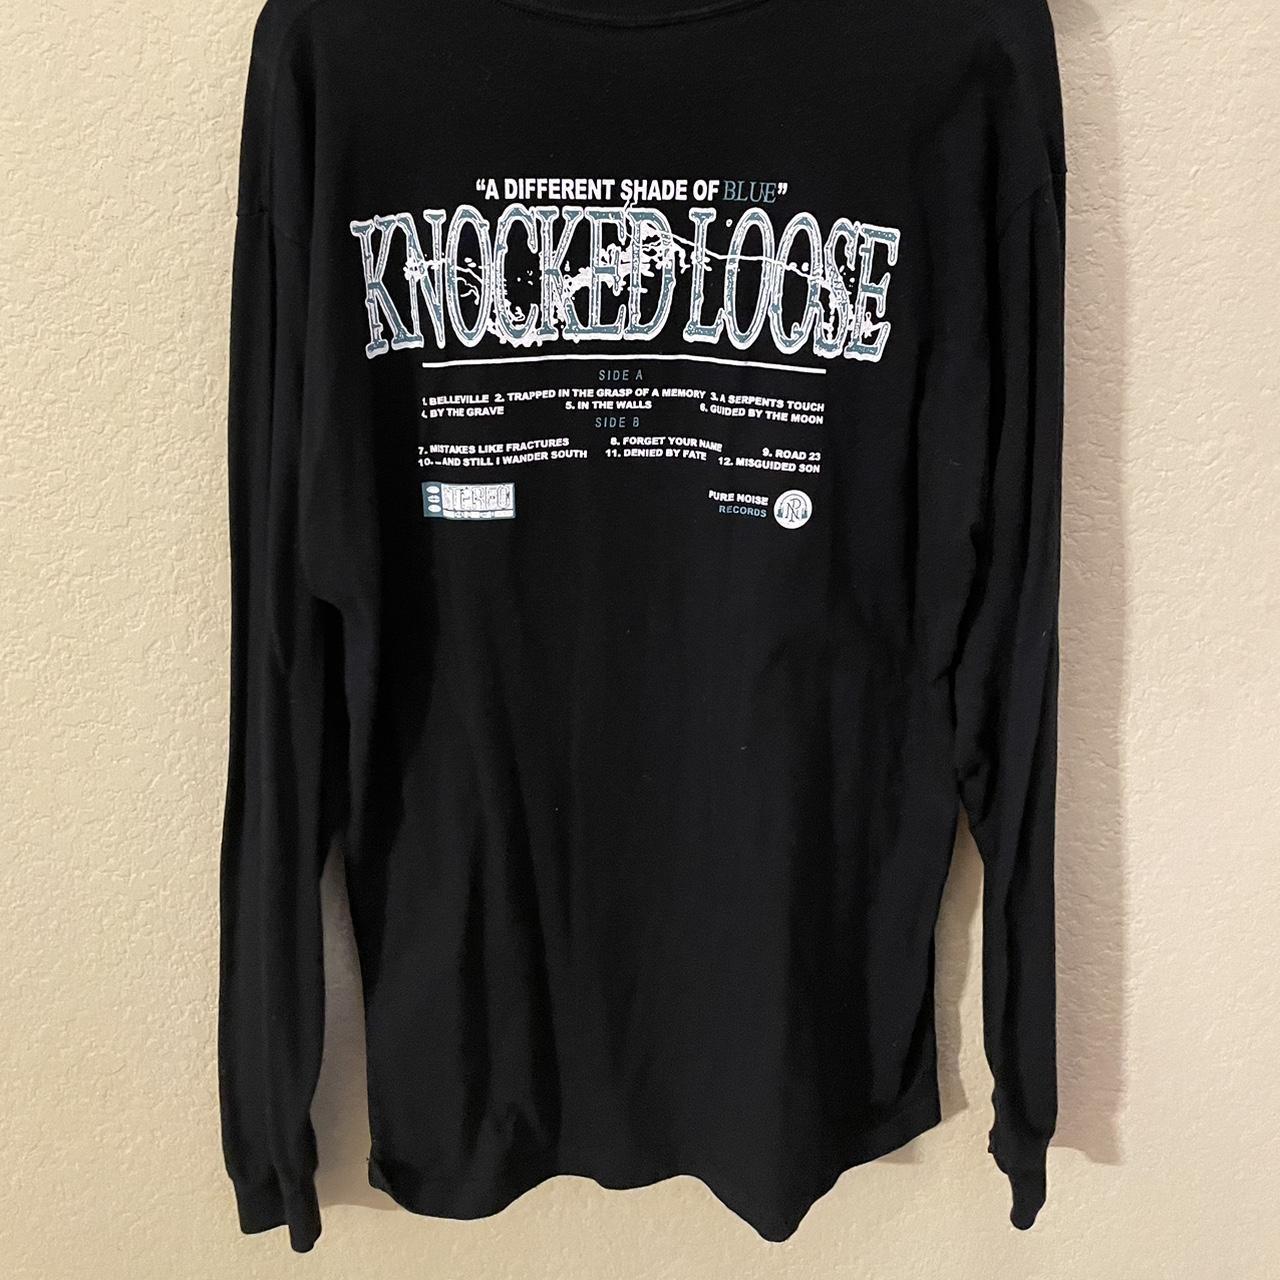 Knocked Loose- “Mistakes Like Fractures” - Black Shirt - No Tag